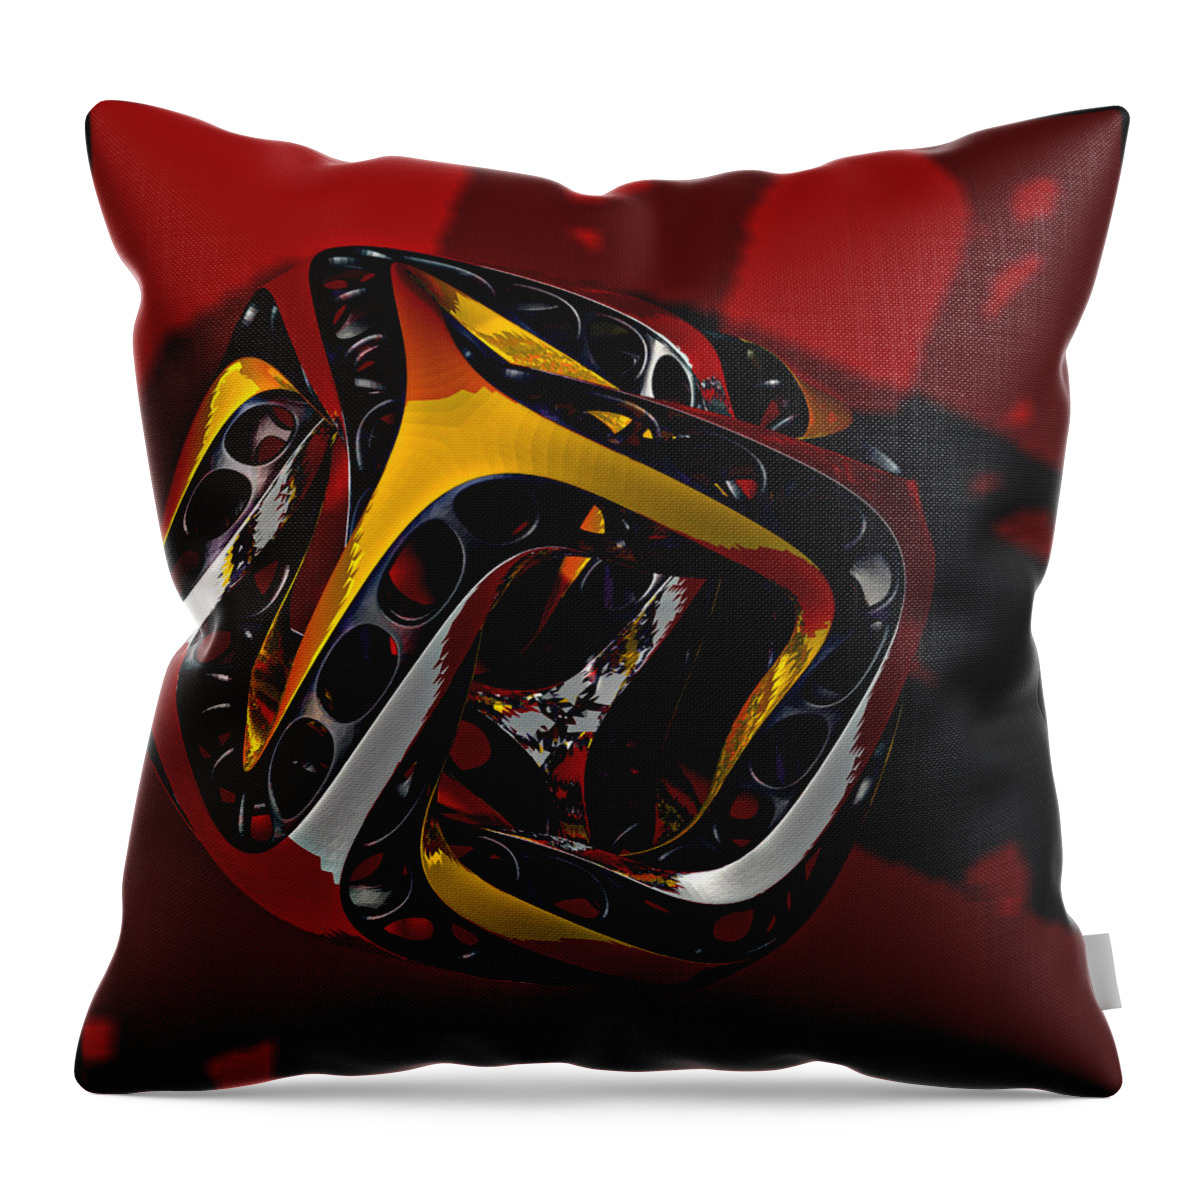 Cube Throw Pillow featuring the digital art C-cube by Andrei SKY